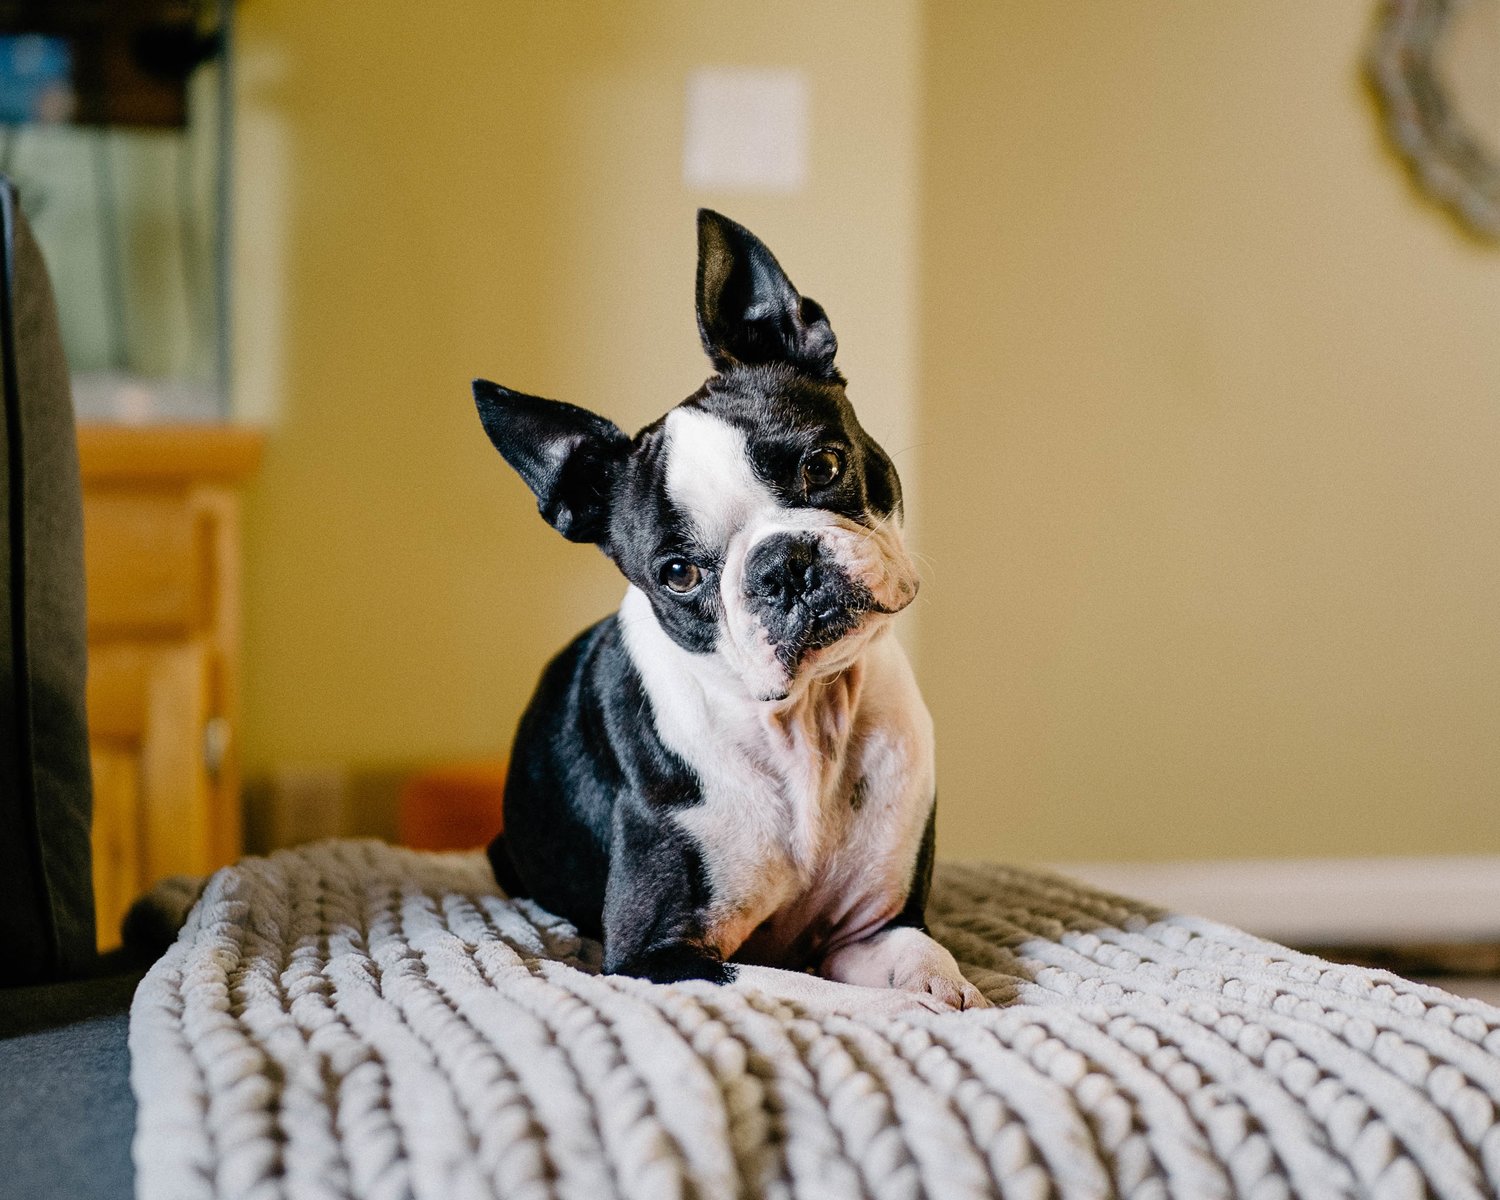 how bad are boston terrier farts?